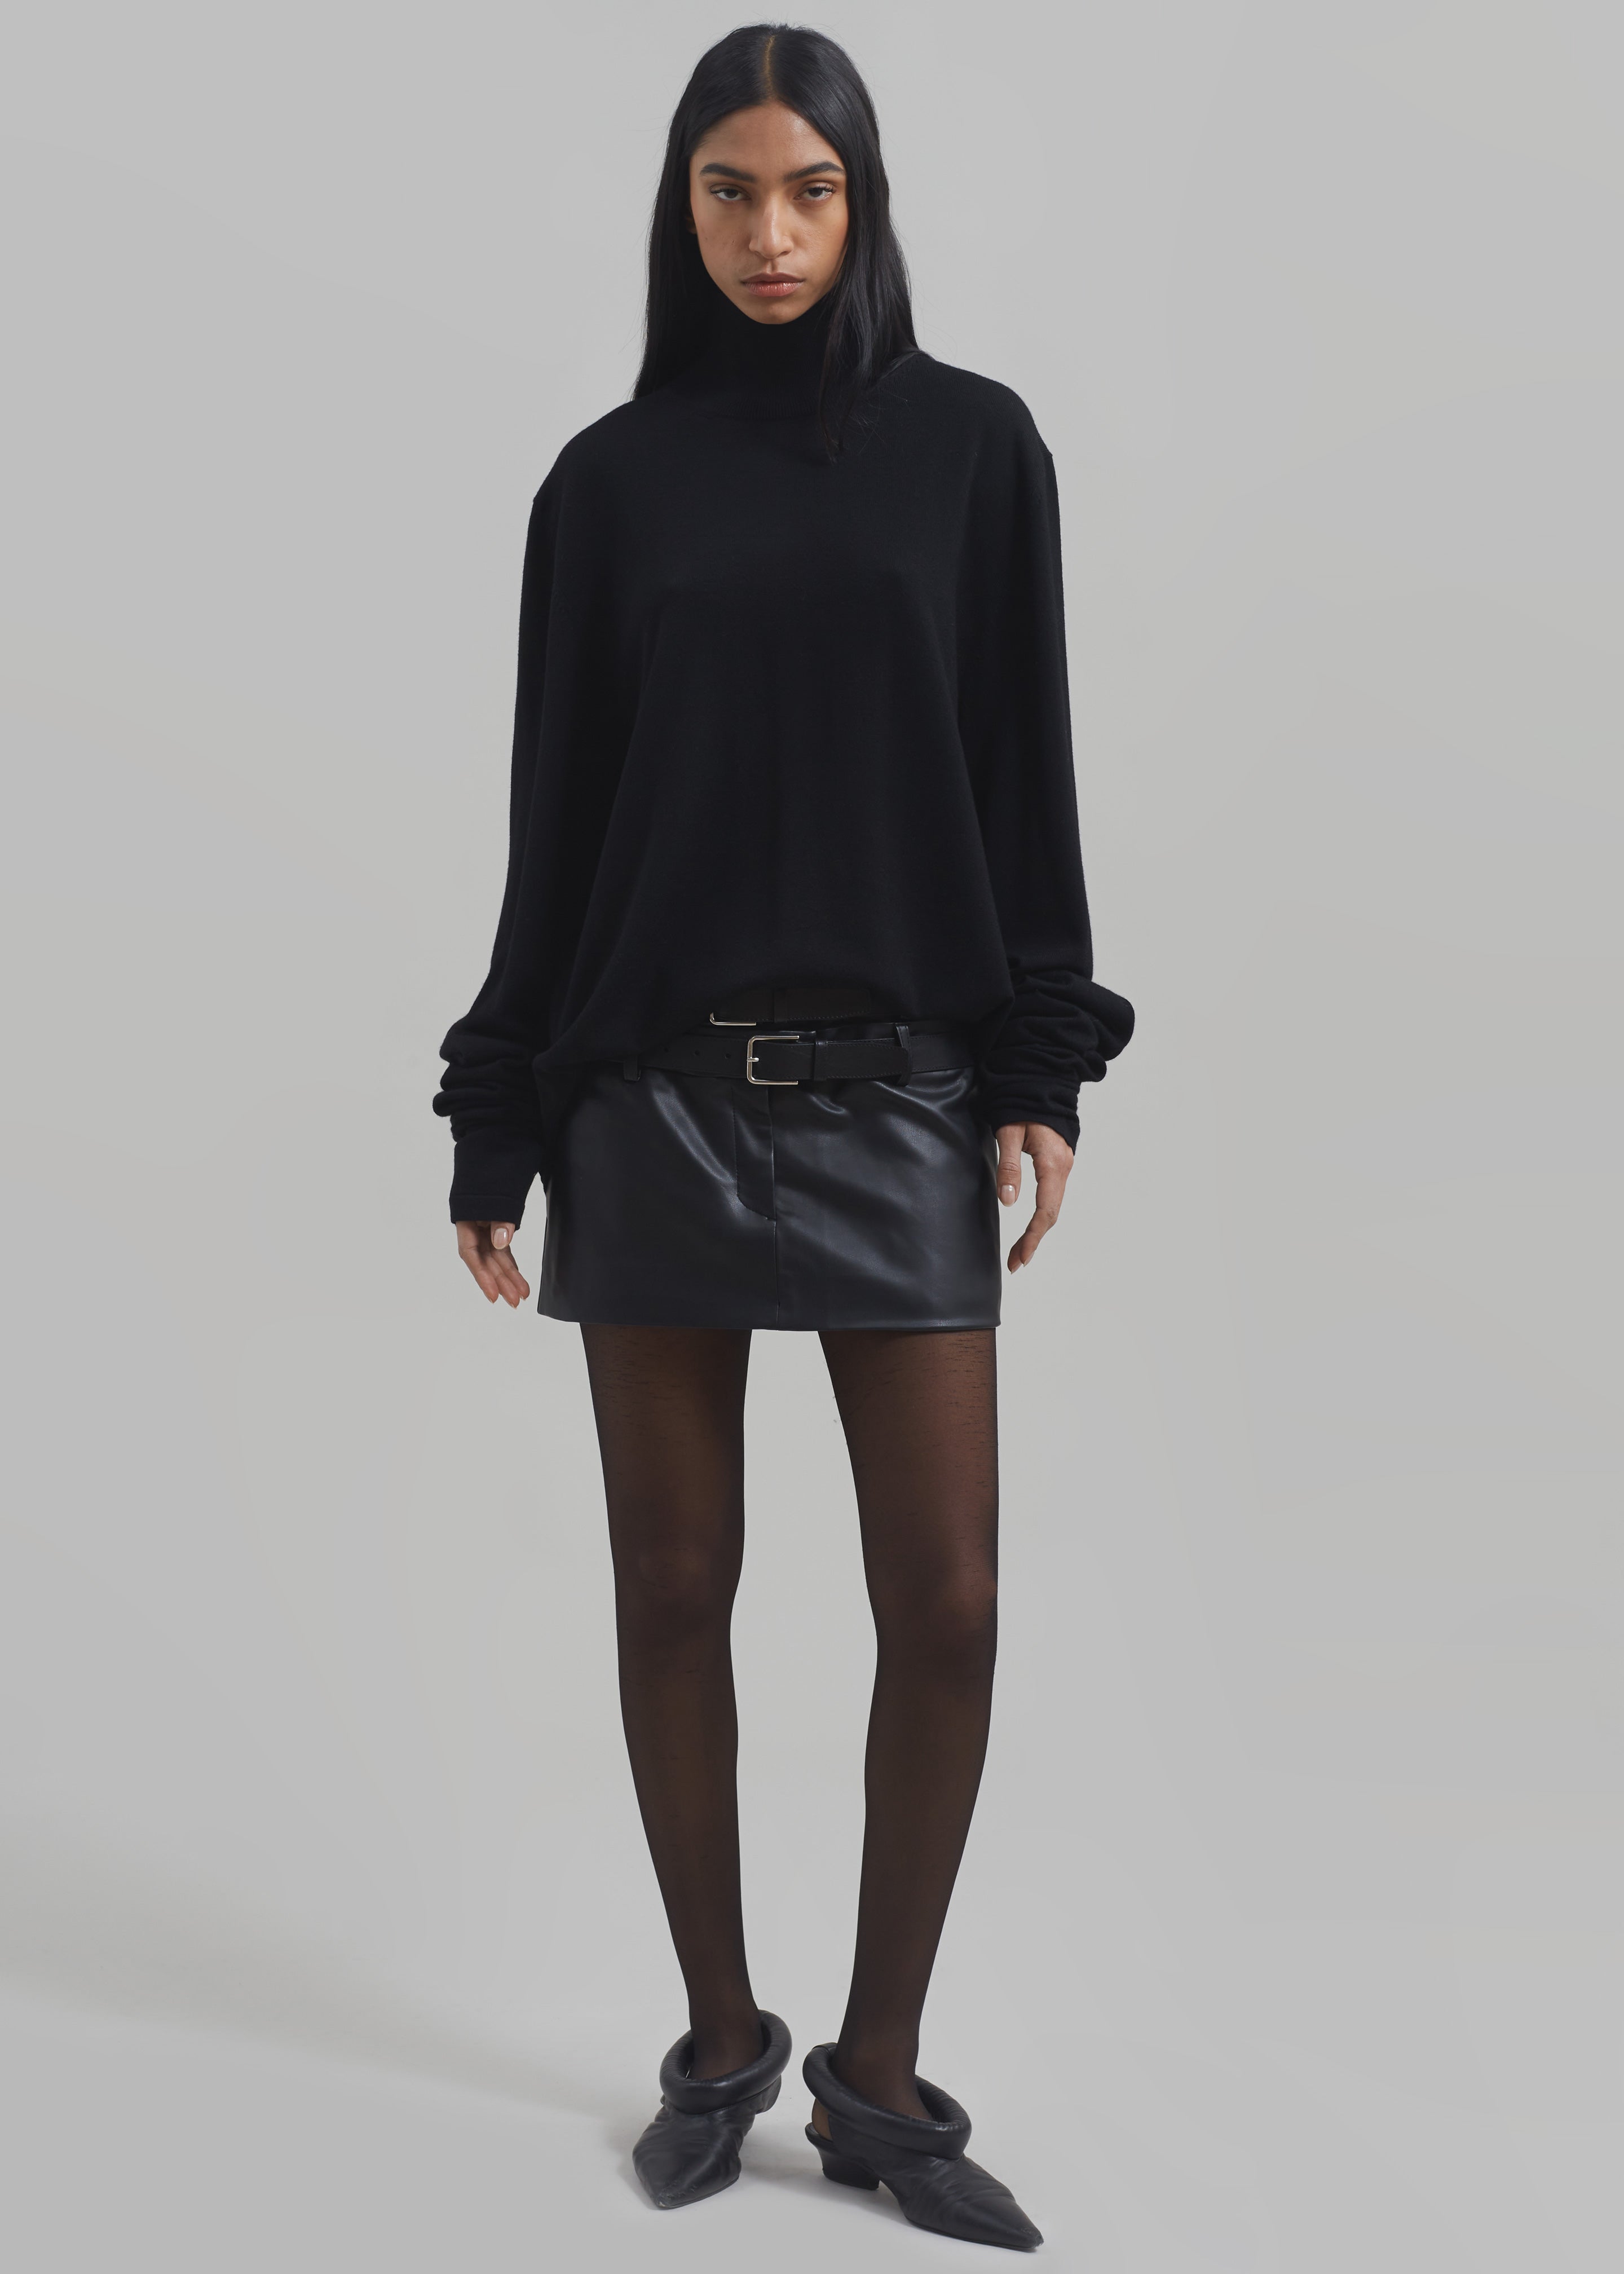 THE FRANKIE SHOP Mary croc-effect faux leather mini skirt